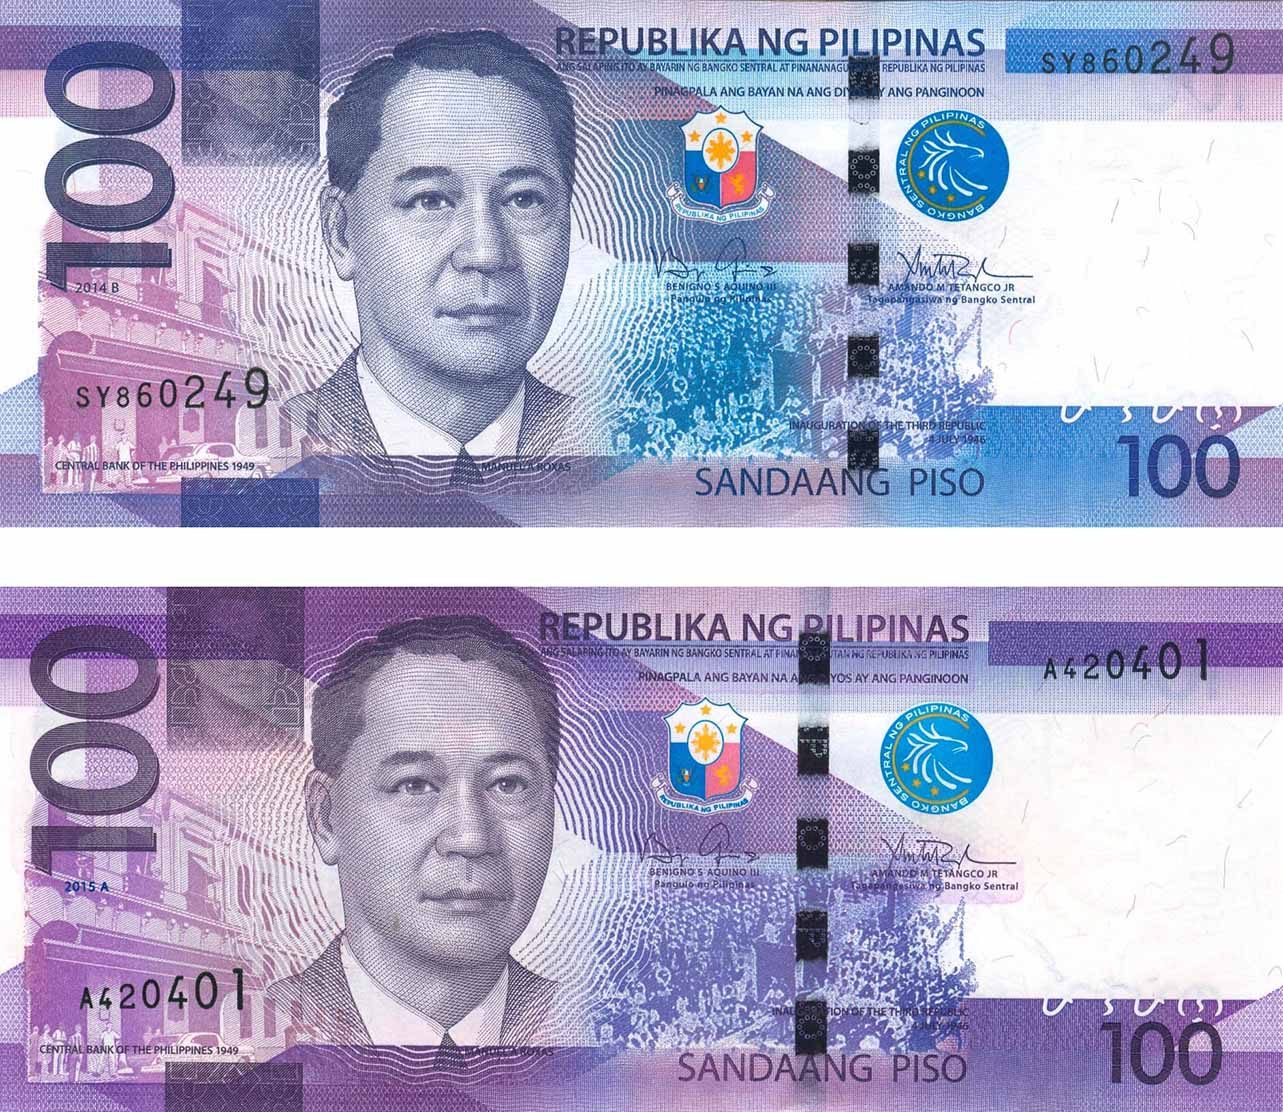 BSP to release P100 bill with stronger violet color on Feb 1